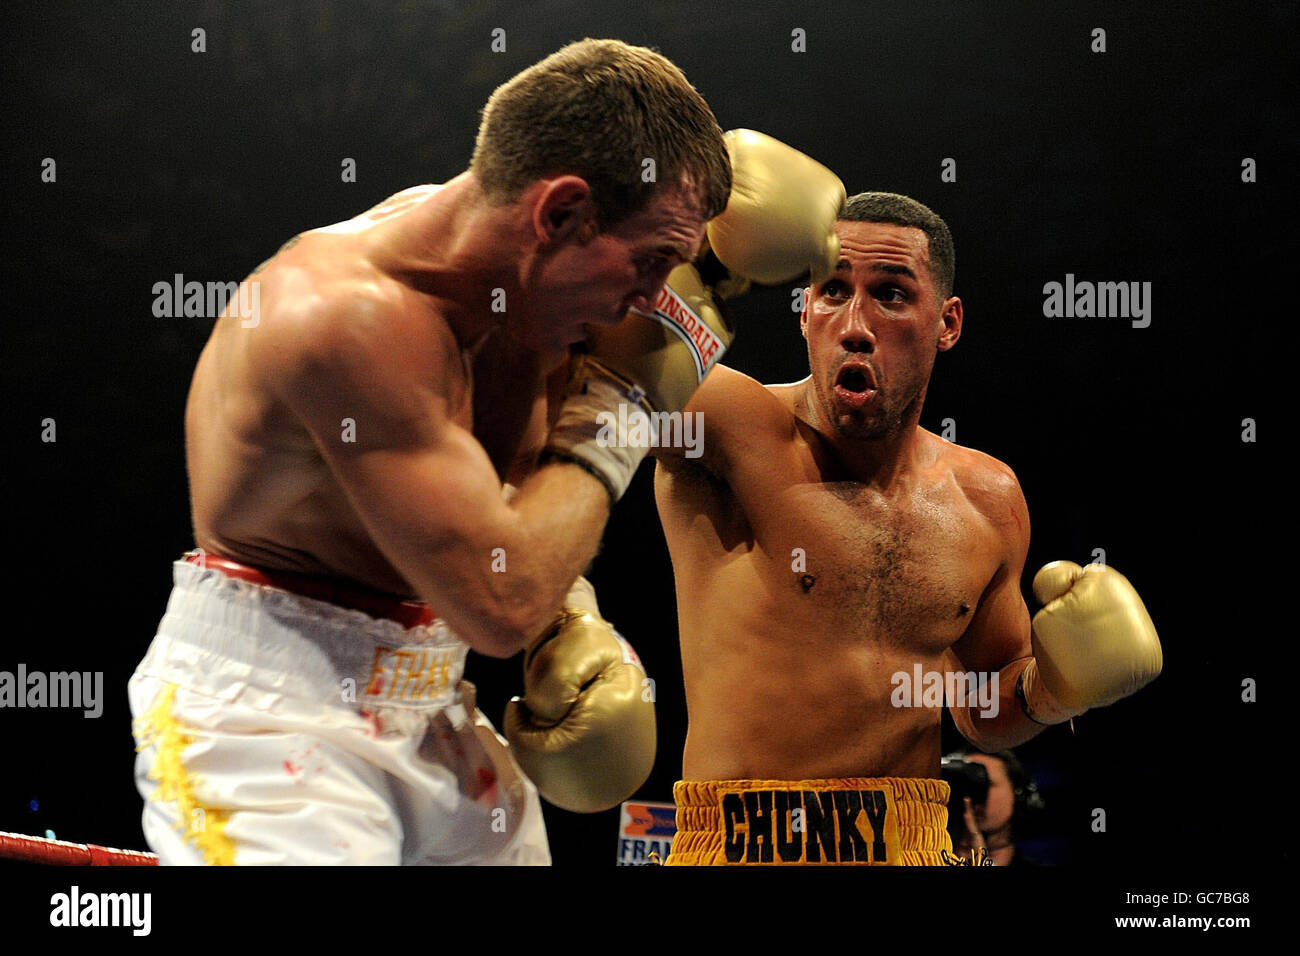 Boxing - Middleweight Bout - James DeGale v Nathan King - Metro Radio Arena. James DeGale (right) in action against Nathan King during the Middleweight Bout at the Metro Radio Arena, Newcastle. Stock Photo